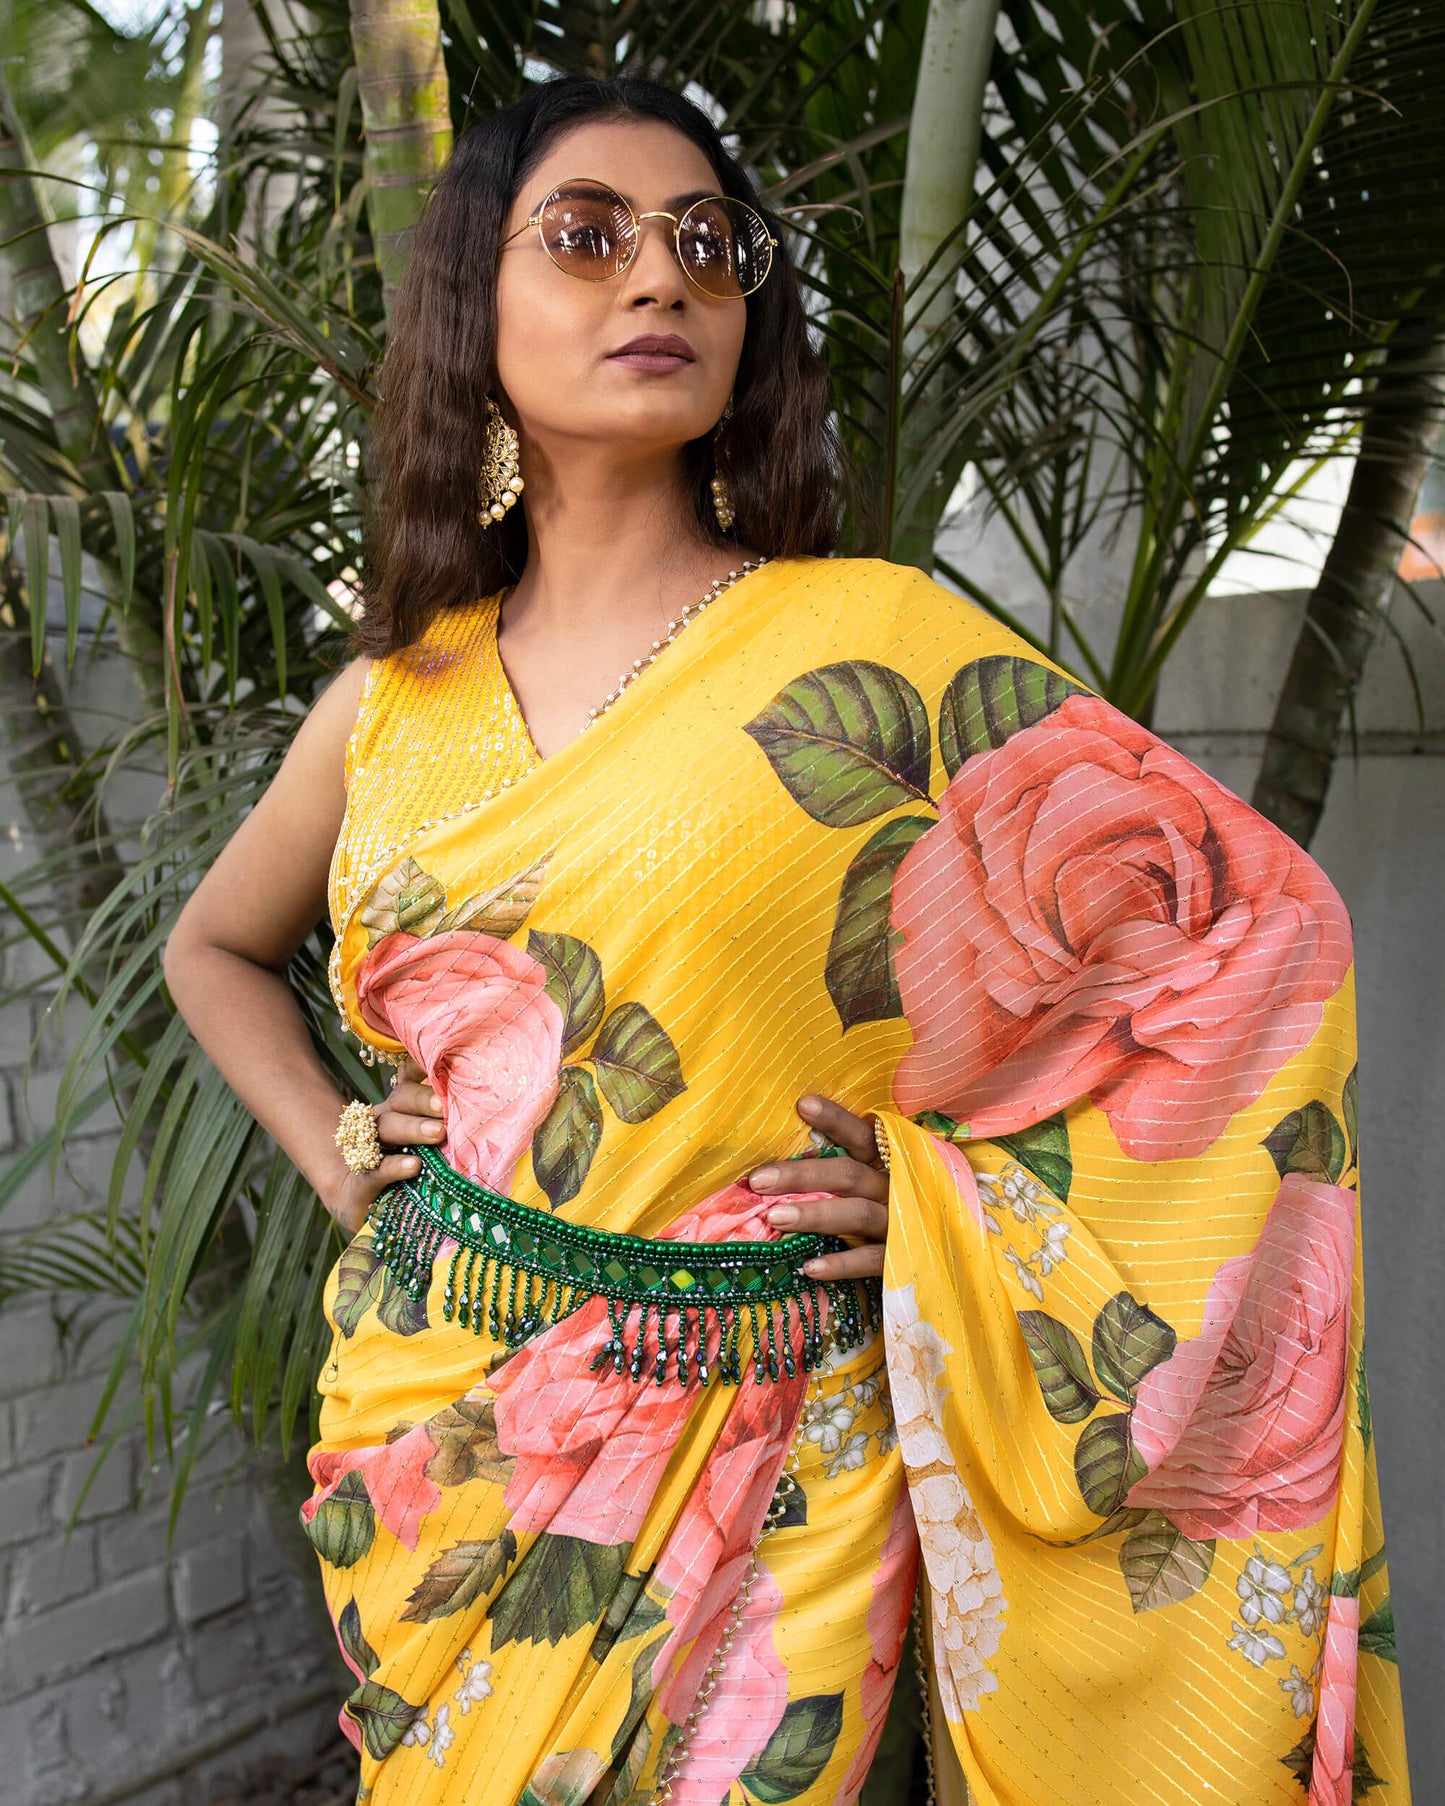 Bumblebee Yellow And Pink Floral Pattren Sequins Georgette Saree With Tubular Beads Pearl Work Lace Border